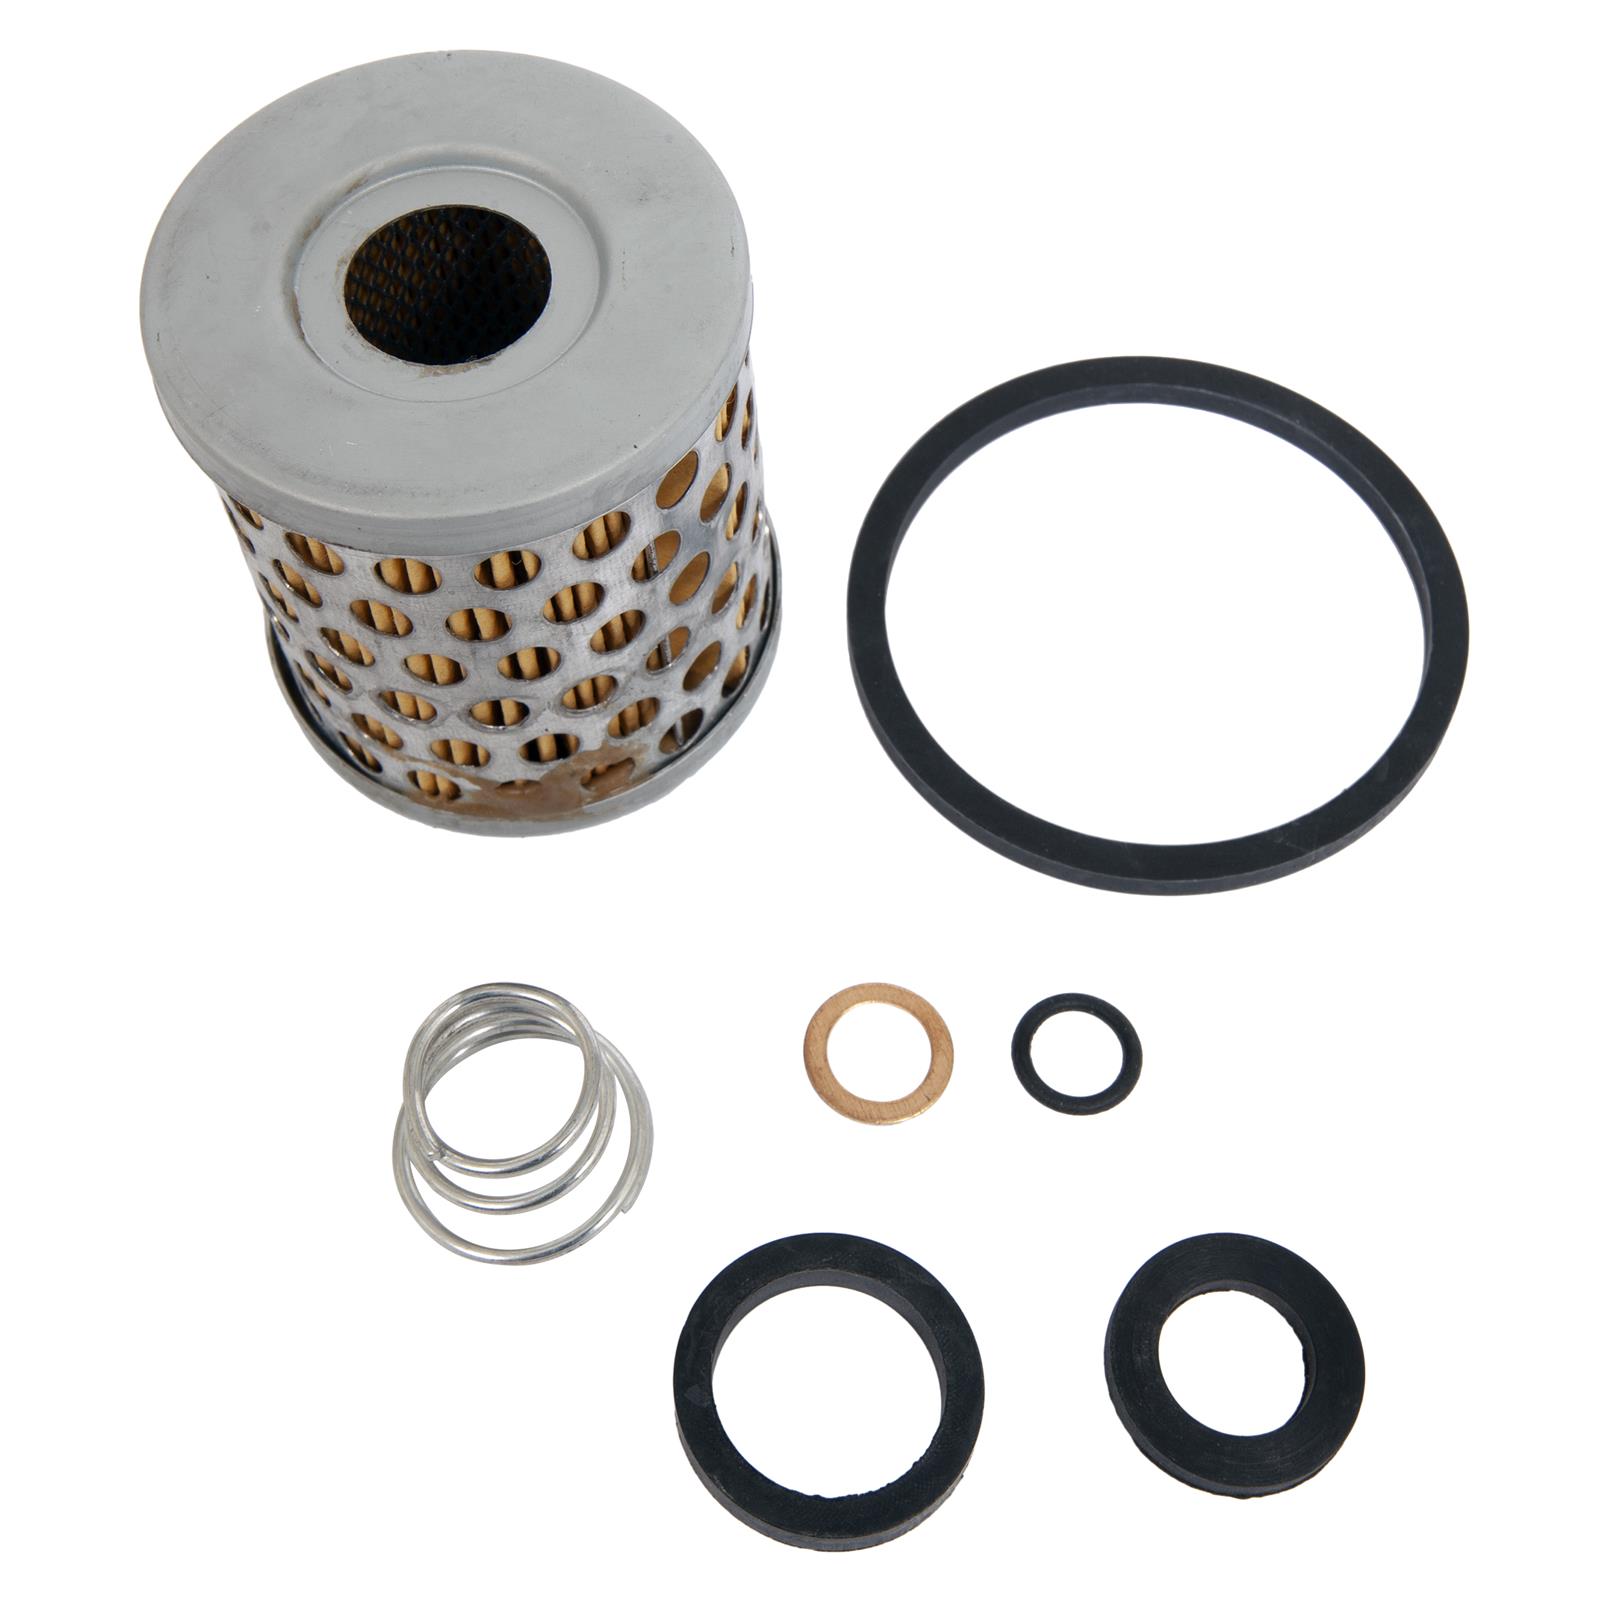 Exterior & Accessories - rod KEYWORD - Made In USA Filter Options - Free  Shipping on Orders Over $109 at Summit Racing